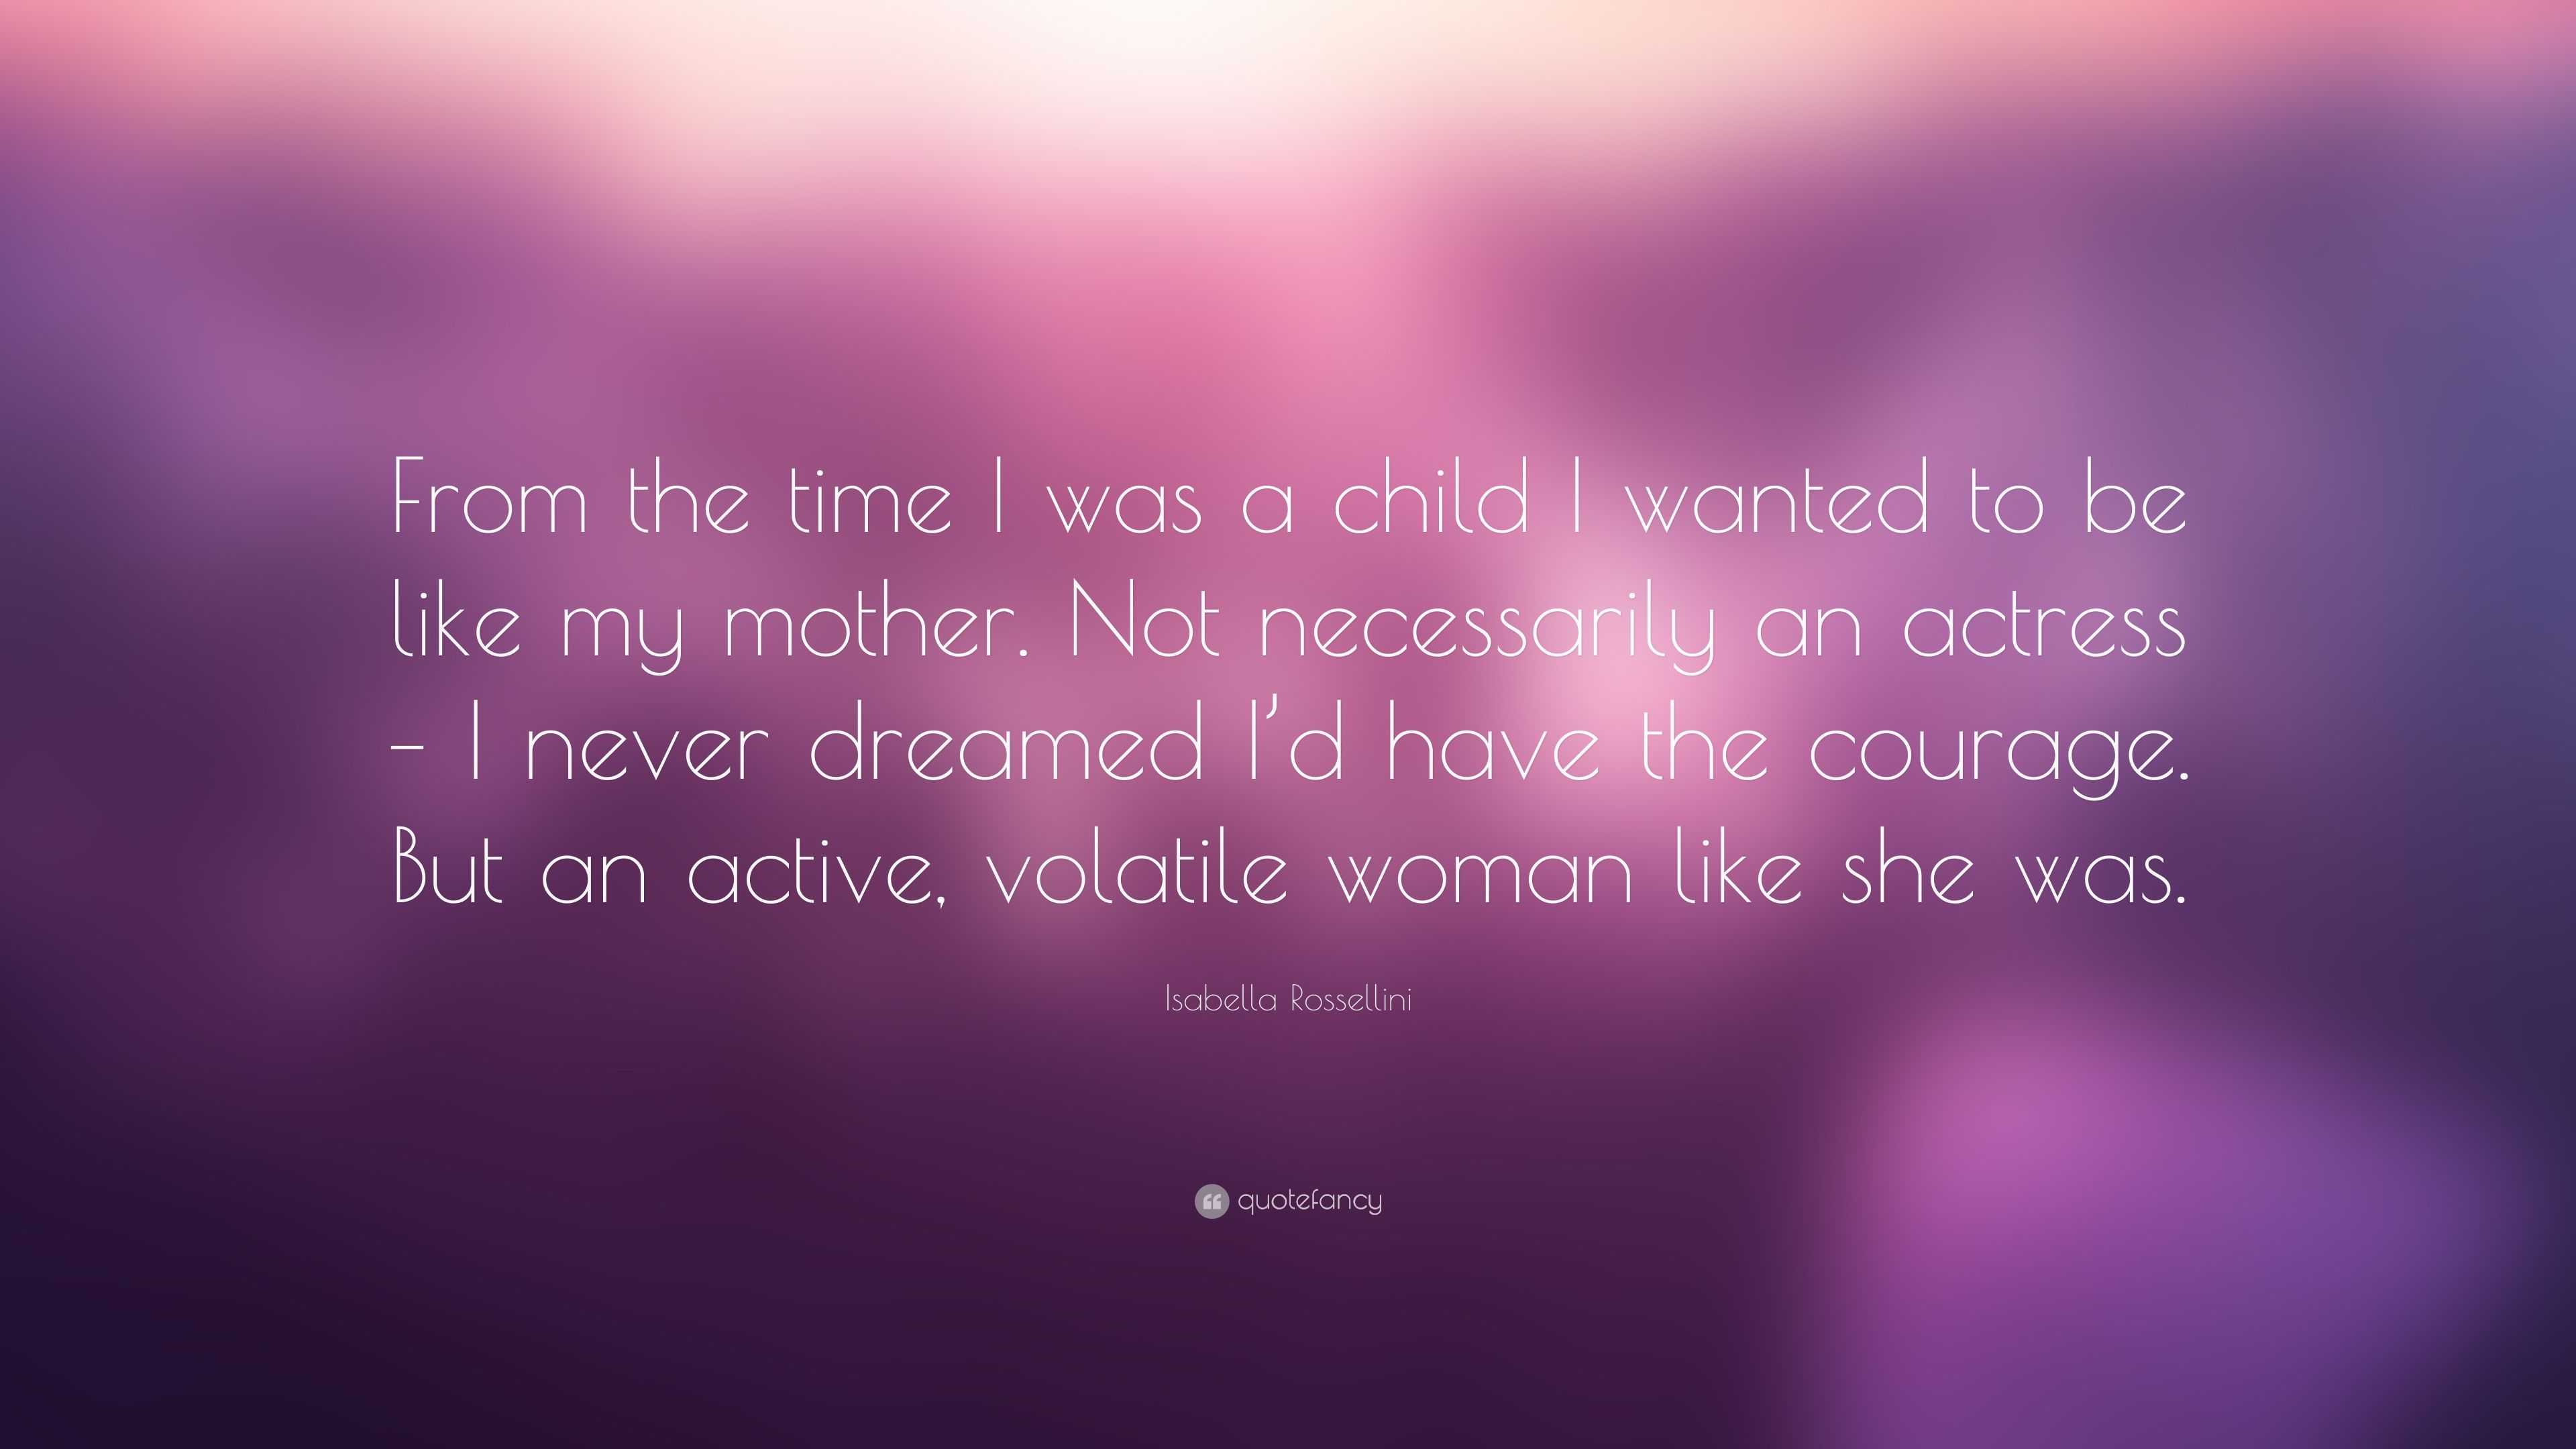 Isabella Rossellini Quote: “From the time I was a child I wanted to be ...